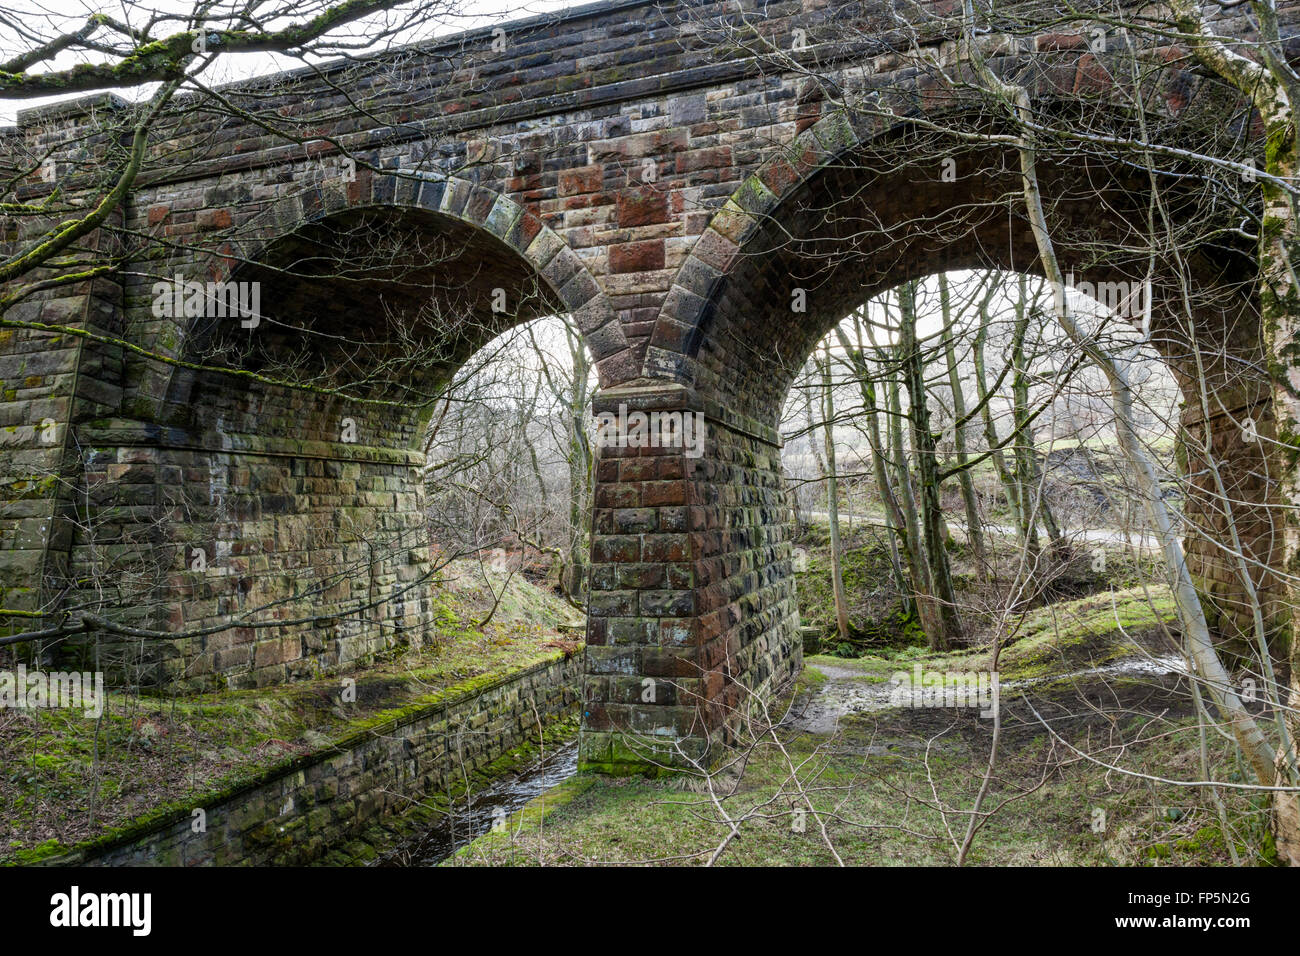 A stone railway bridge passing over a stream and next to trees, Barber Booth in Derbyshire, England, UK Stock Photo